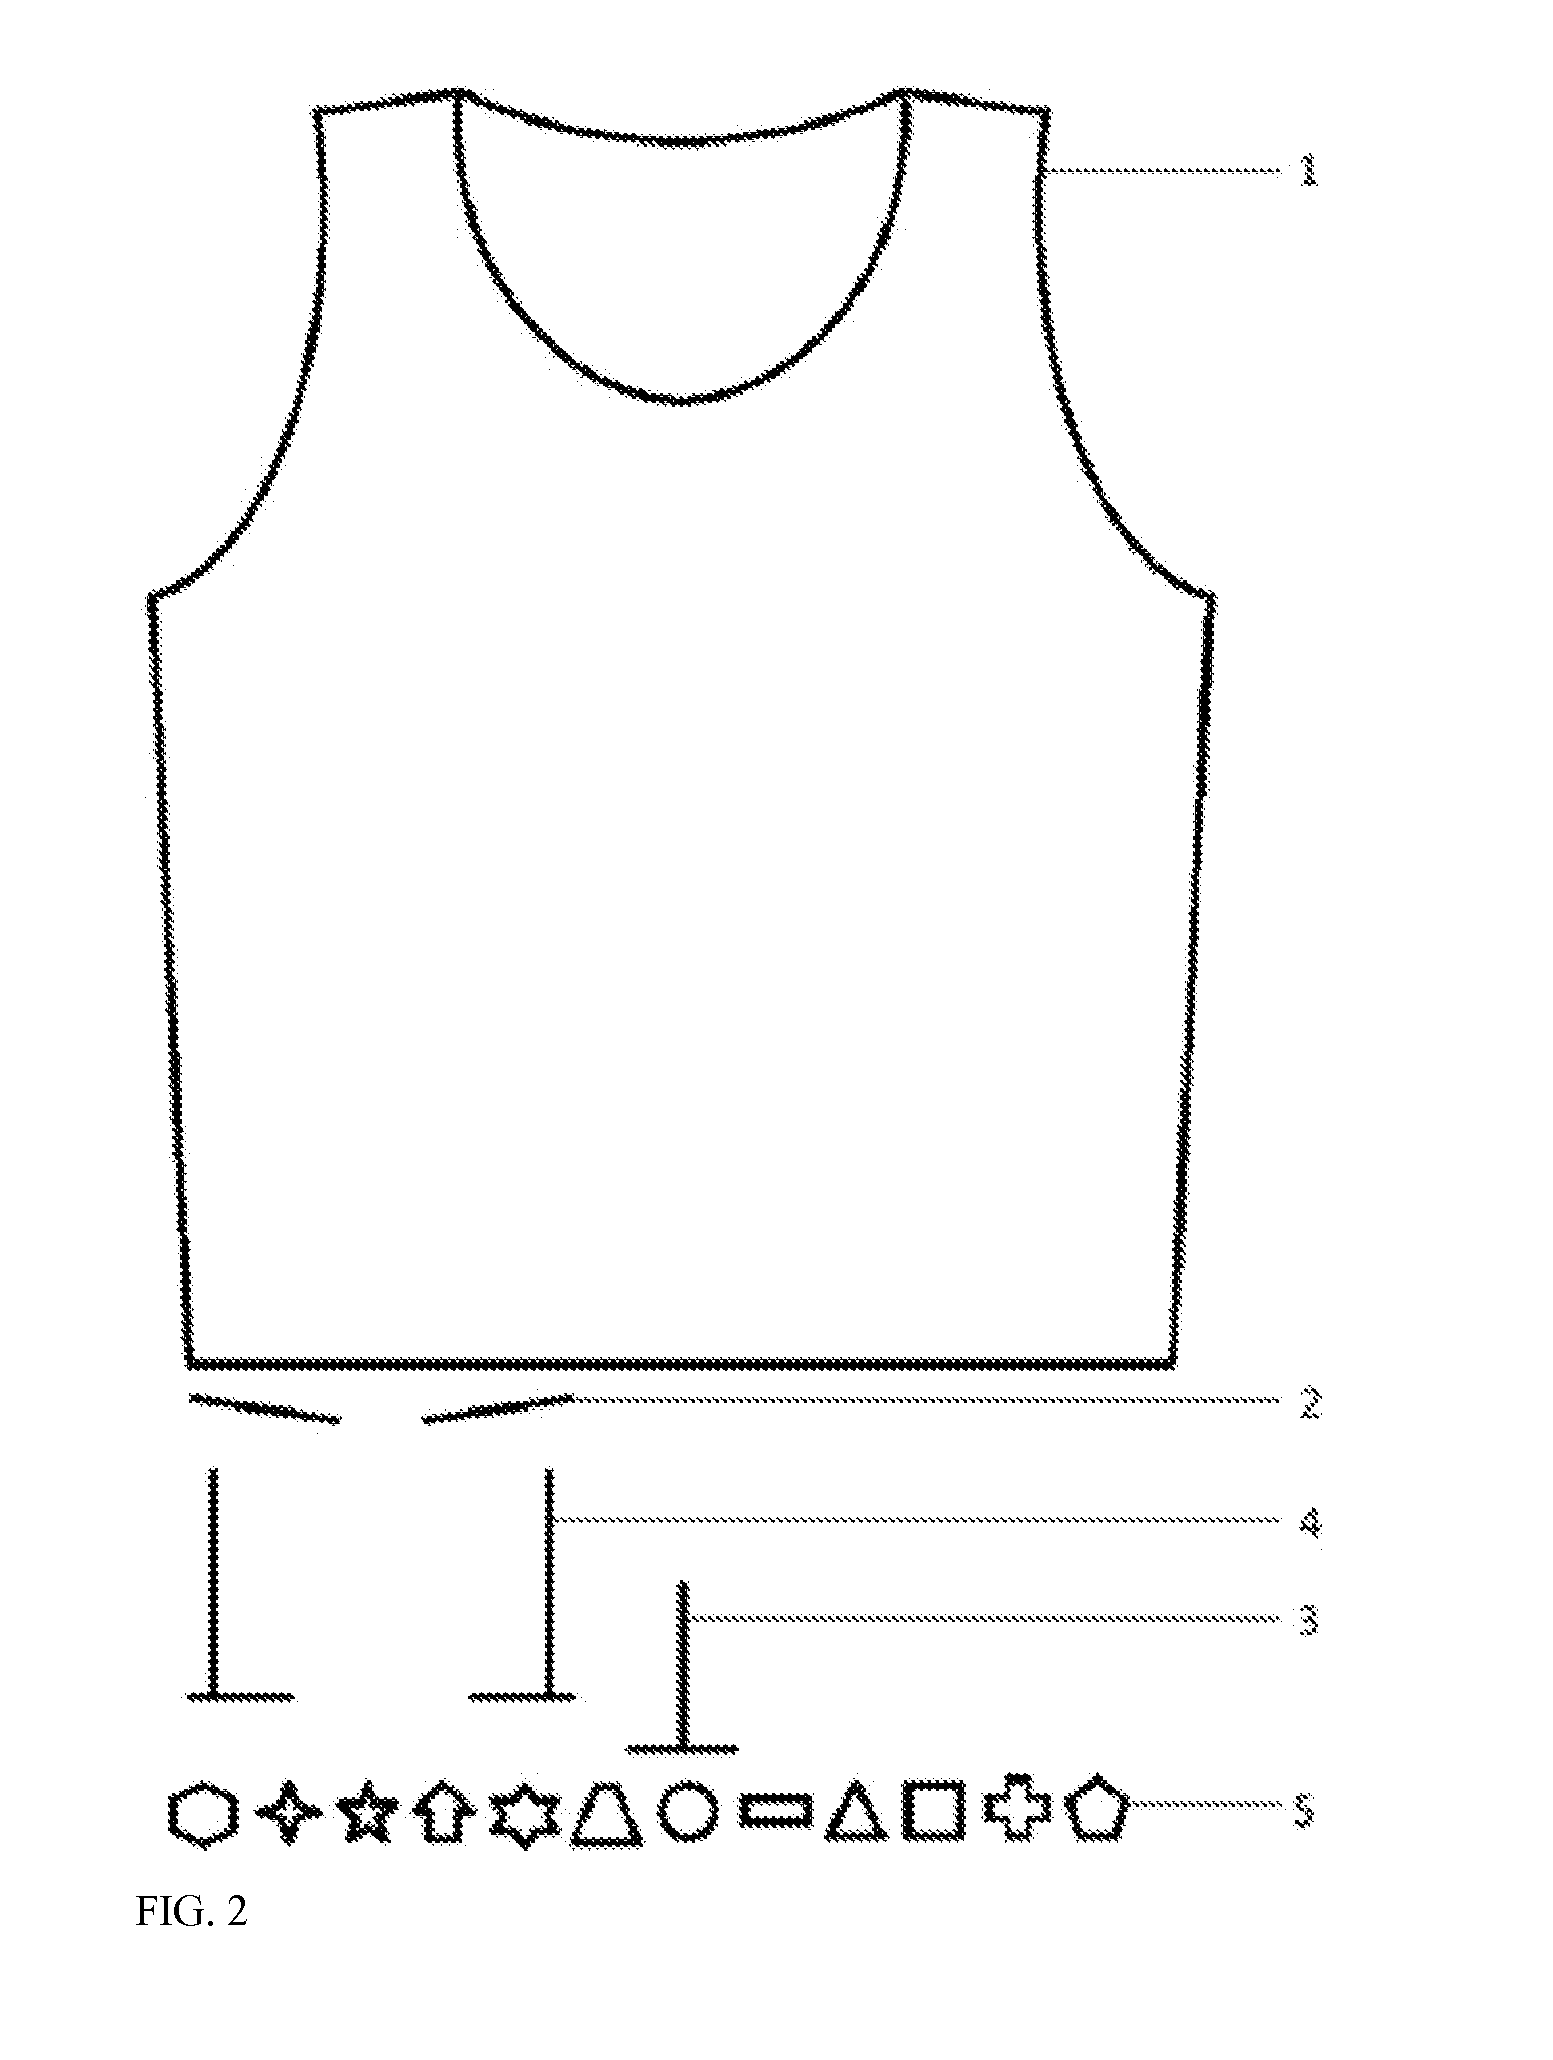 Elastic garment for positioning and fixing ECG electrodes